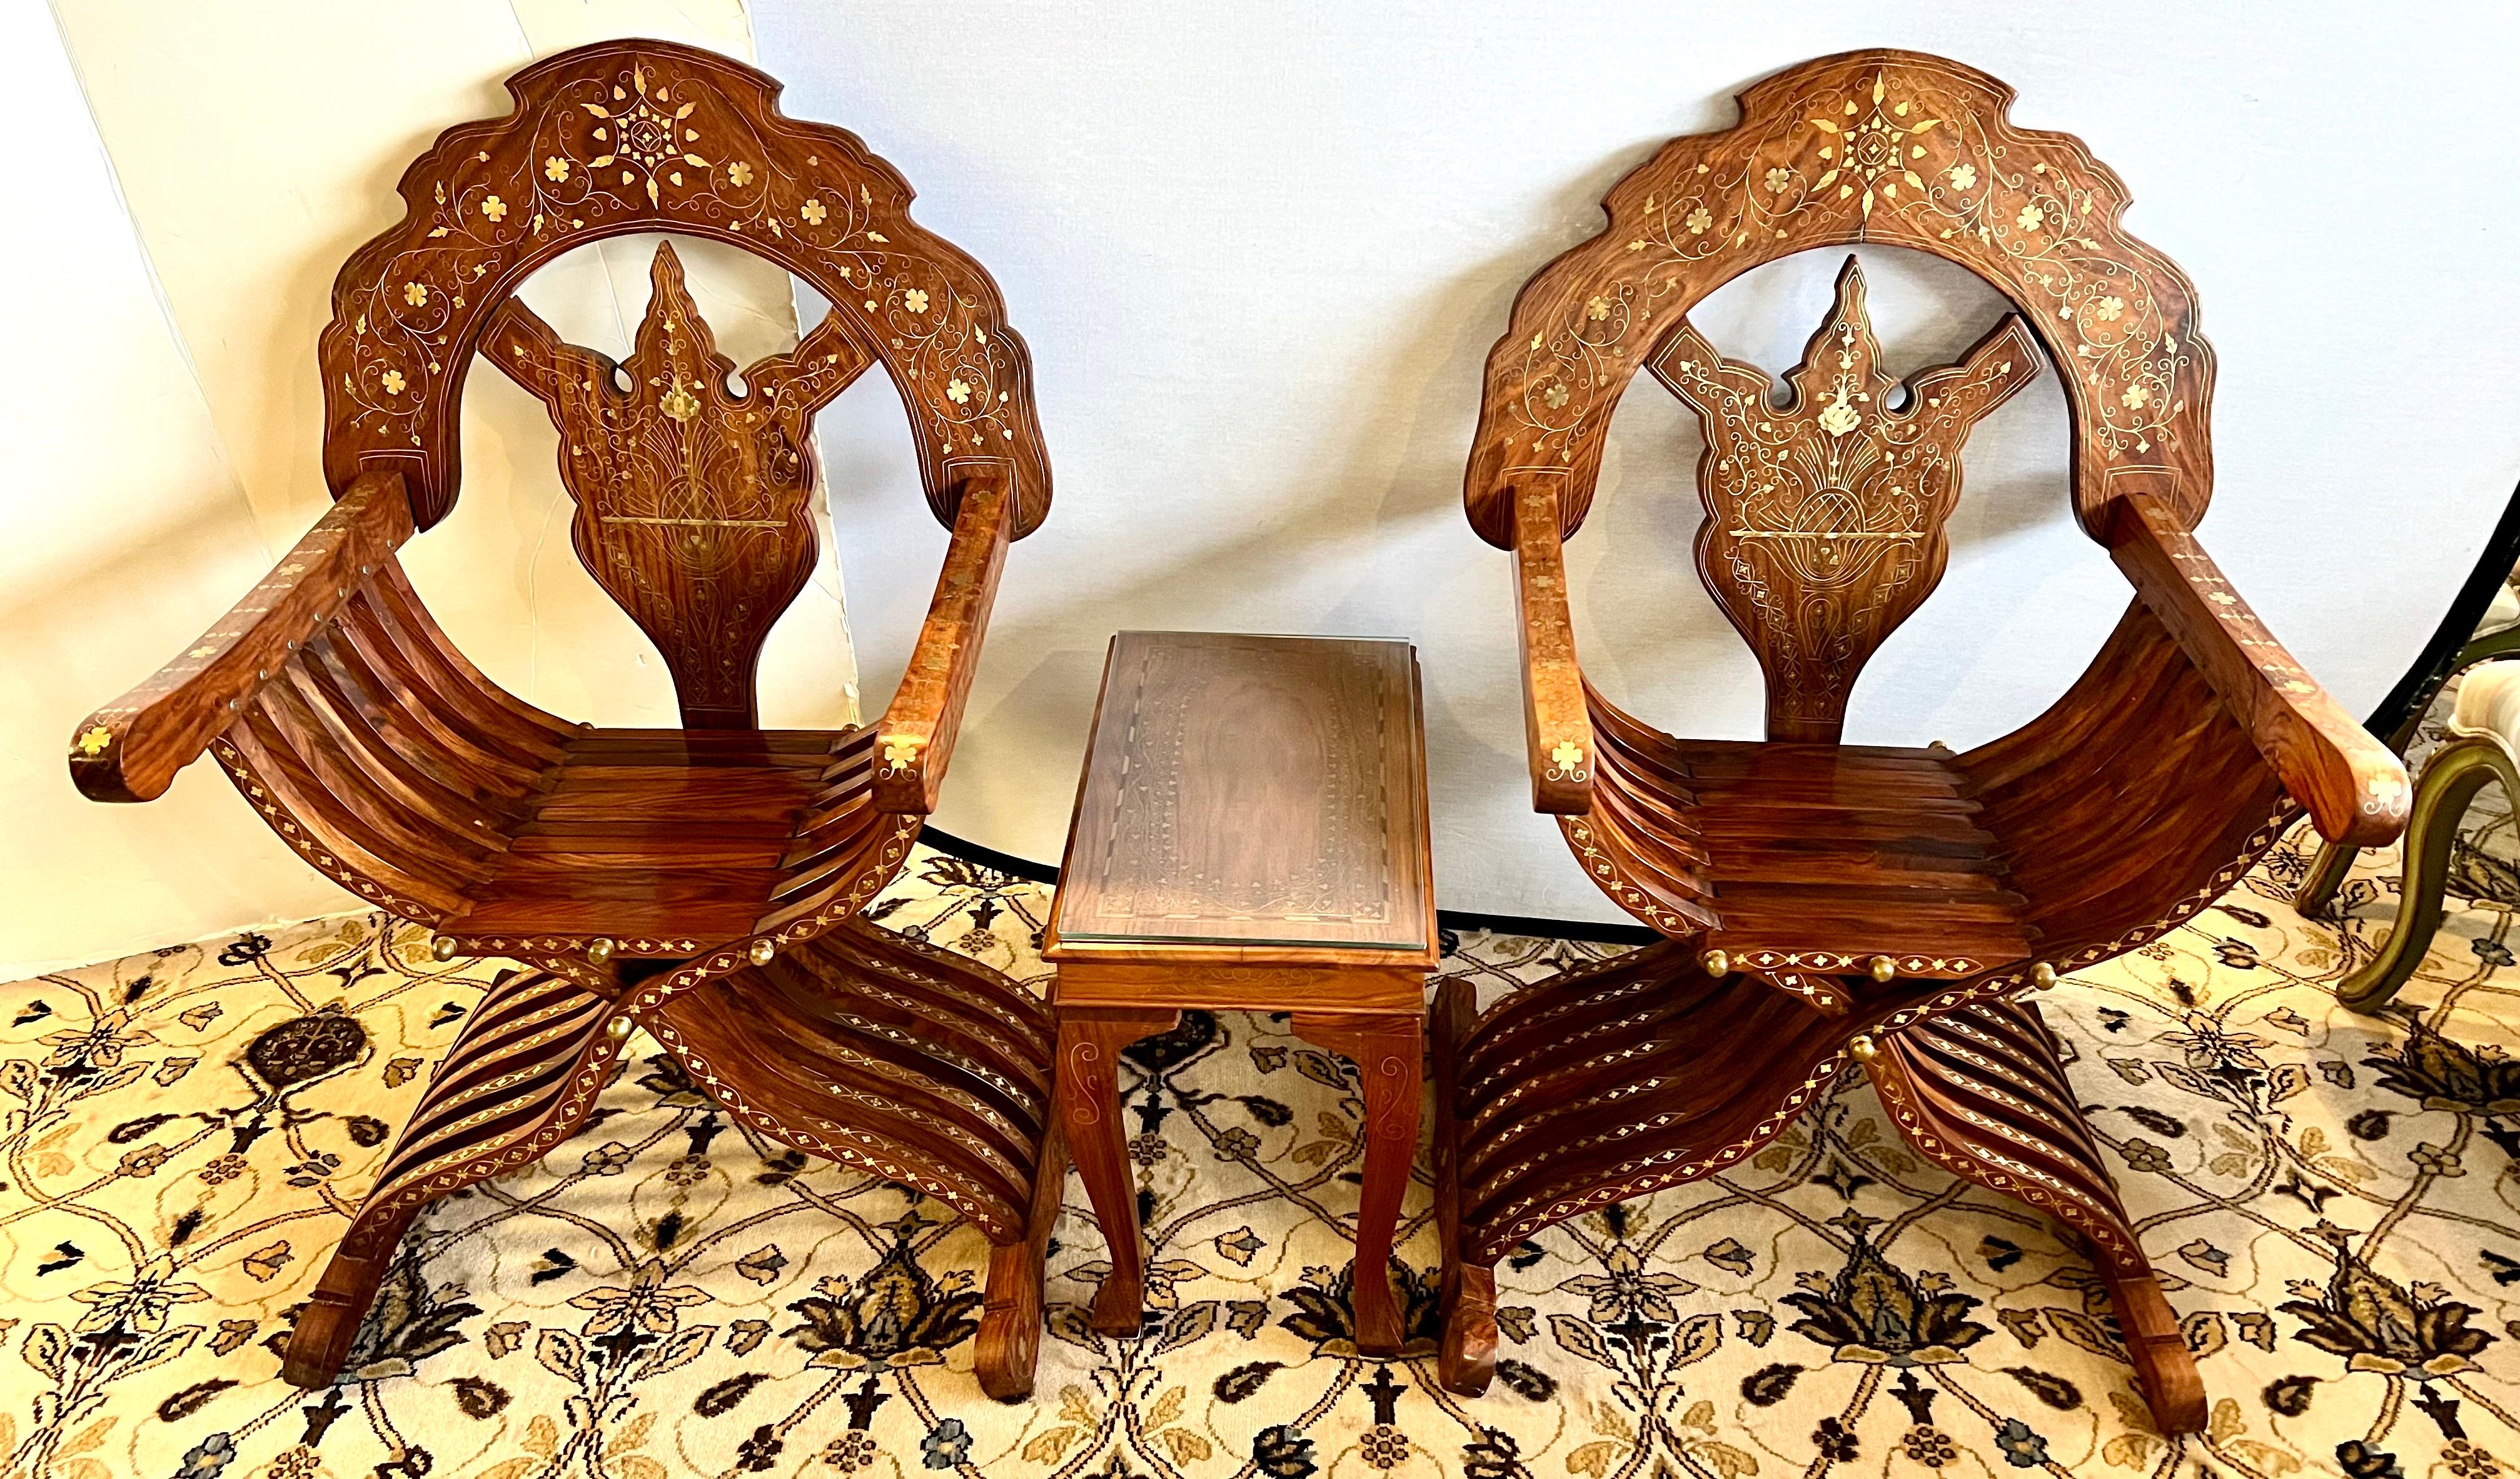 Stunning Savonarola chairs with intricate brass inlay of flowers and scrollwork on the backs, arms and legs. 
The chairs have metal rods to the seat which can be removed and then the chairs can be folded.
The table has equally stunning brass